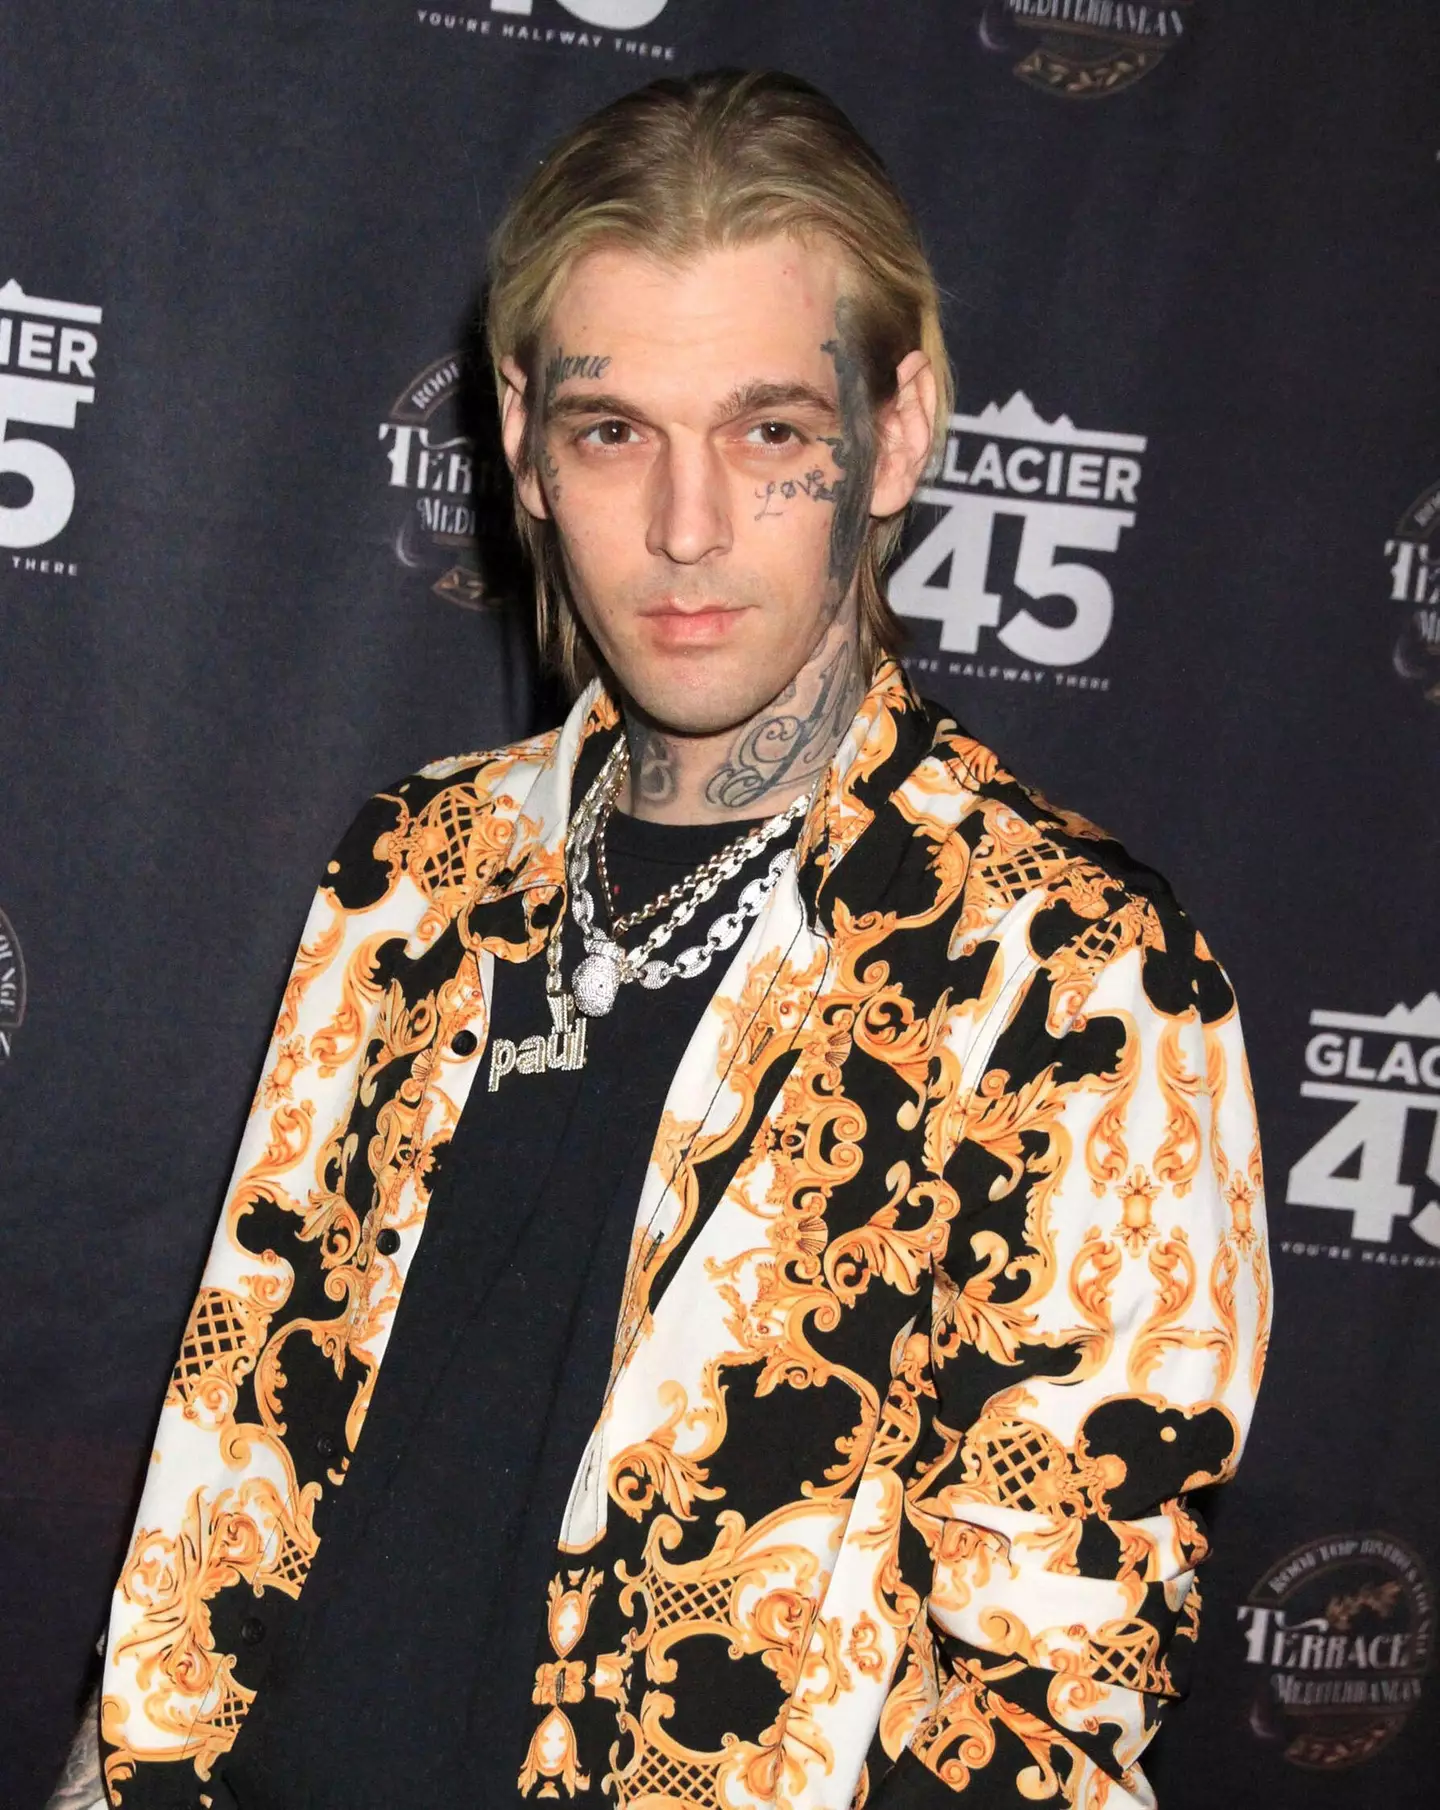 Aaron Carter was found dead in his home last November.